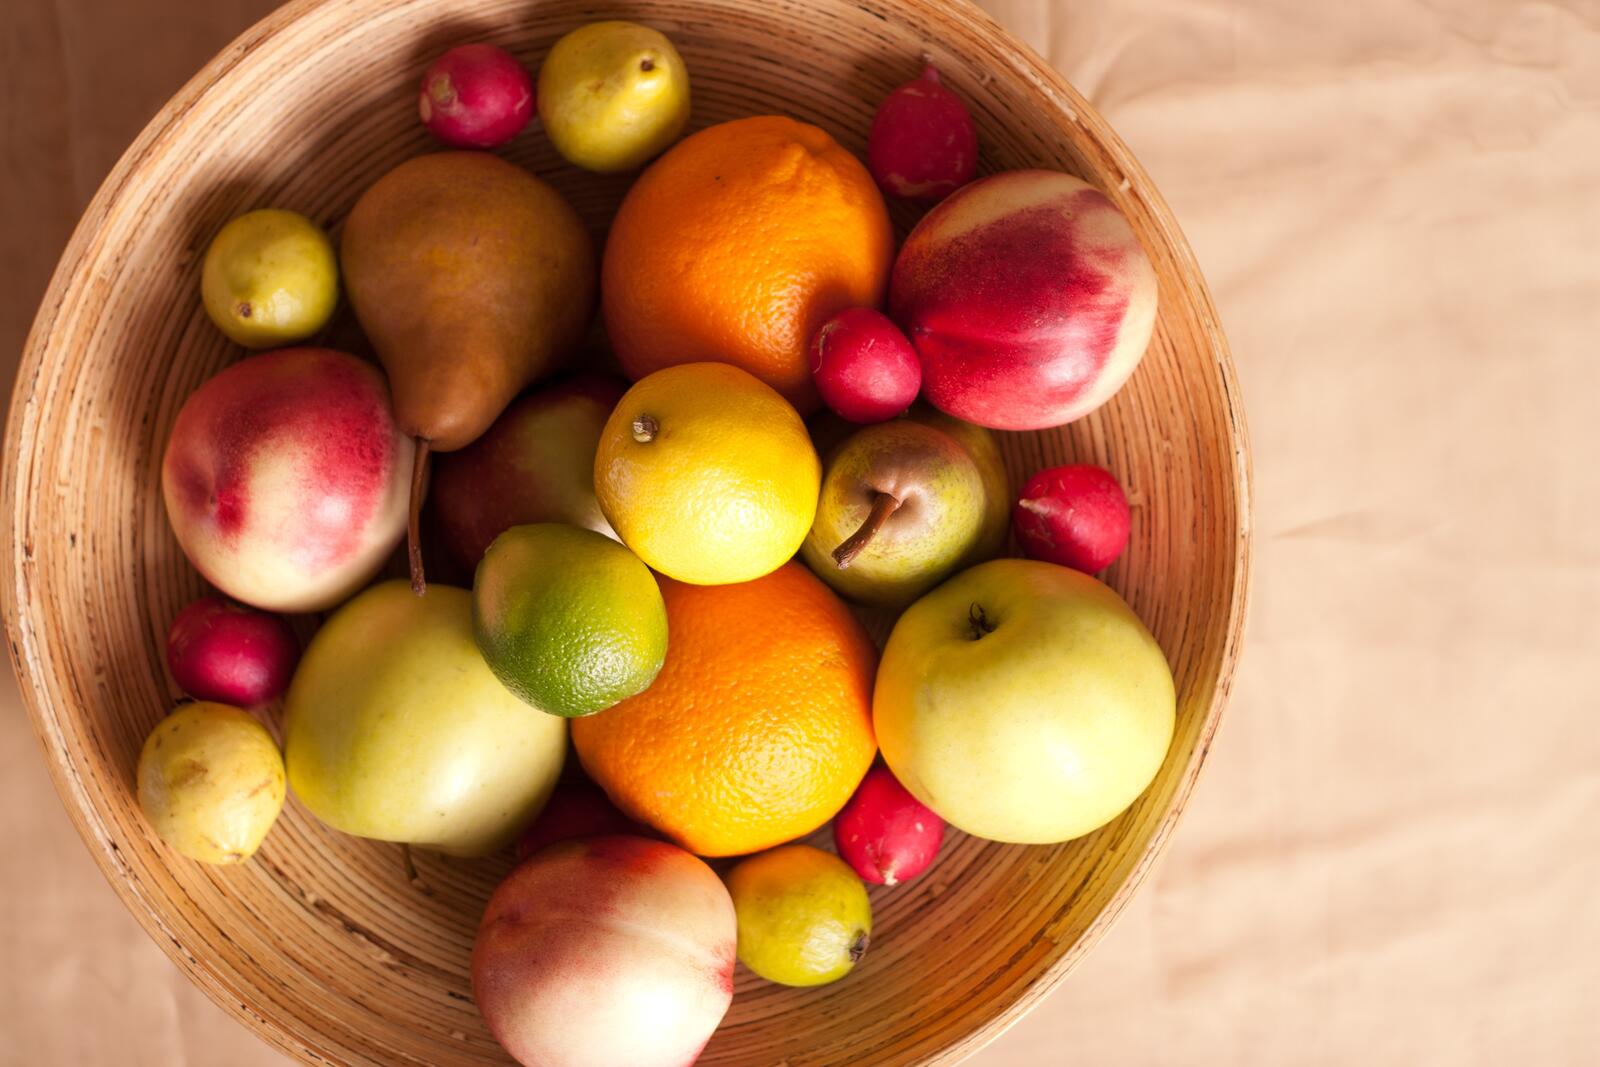 Free photo A large bowl of apples and citrus fruits